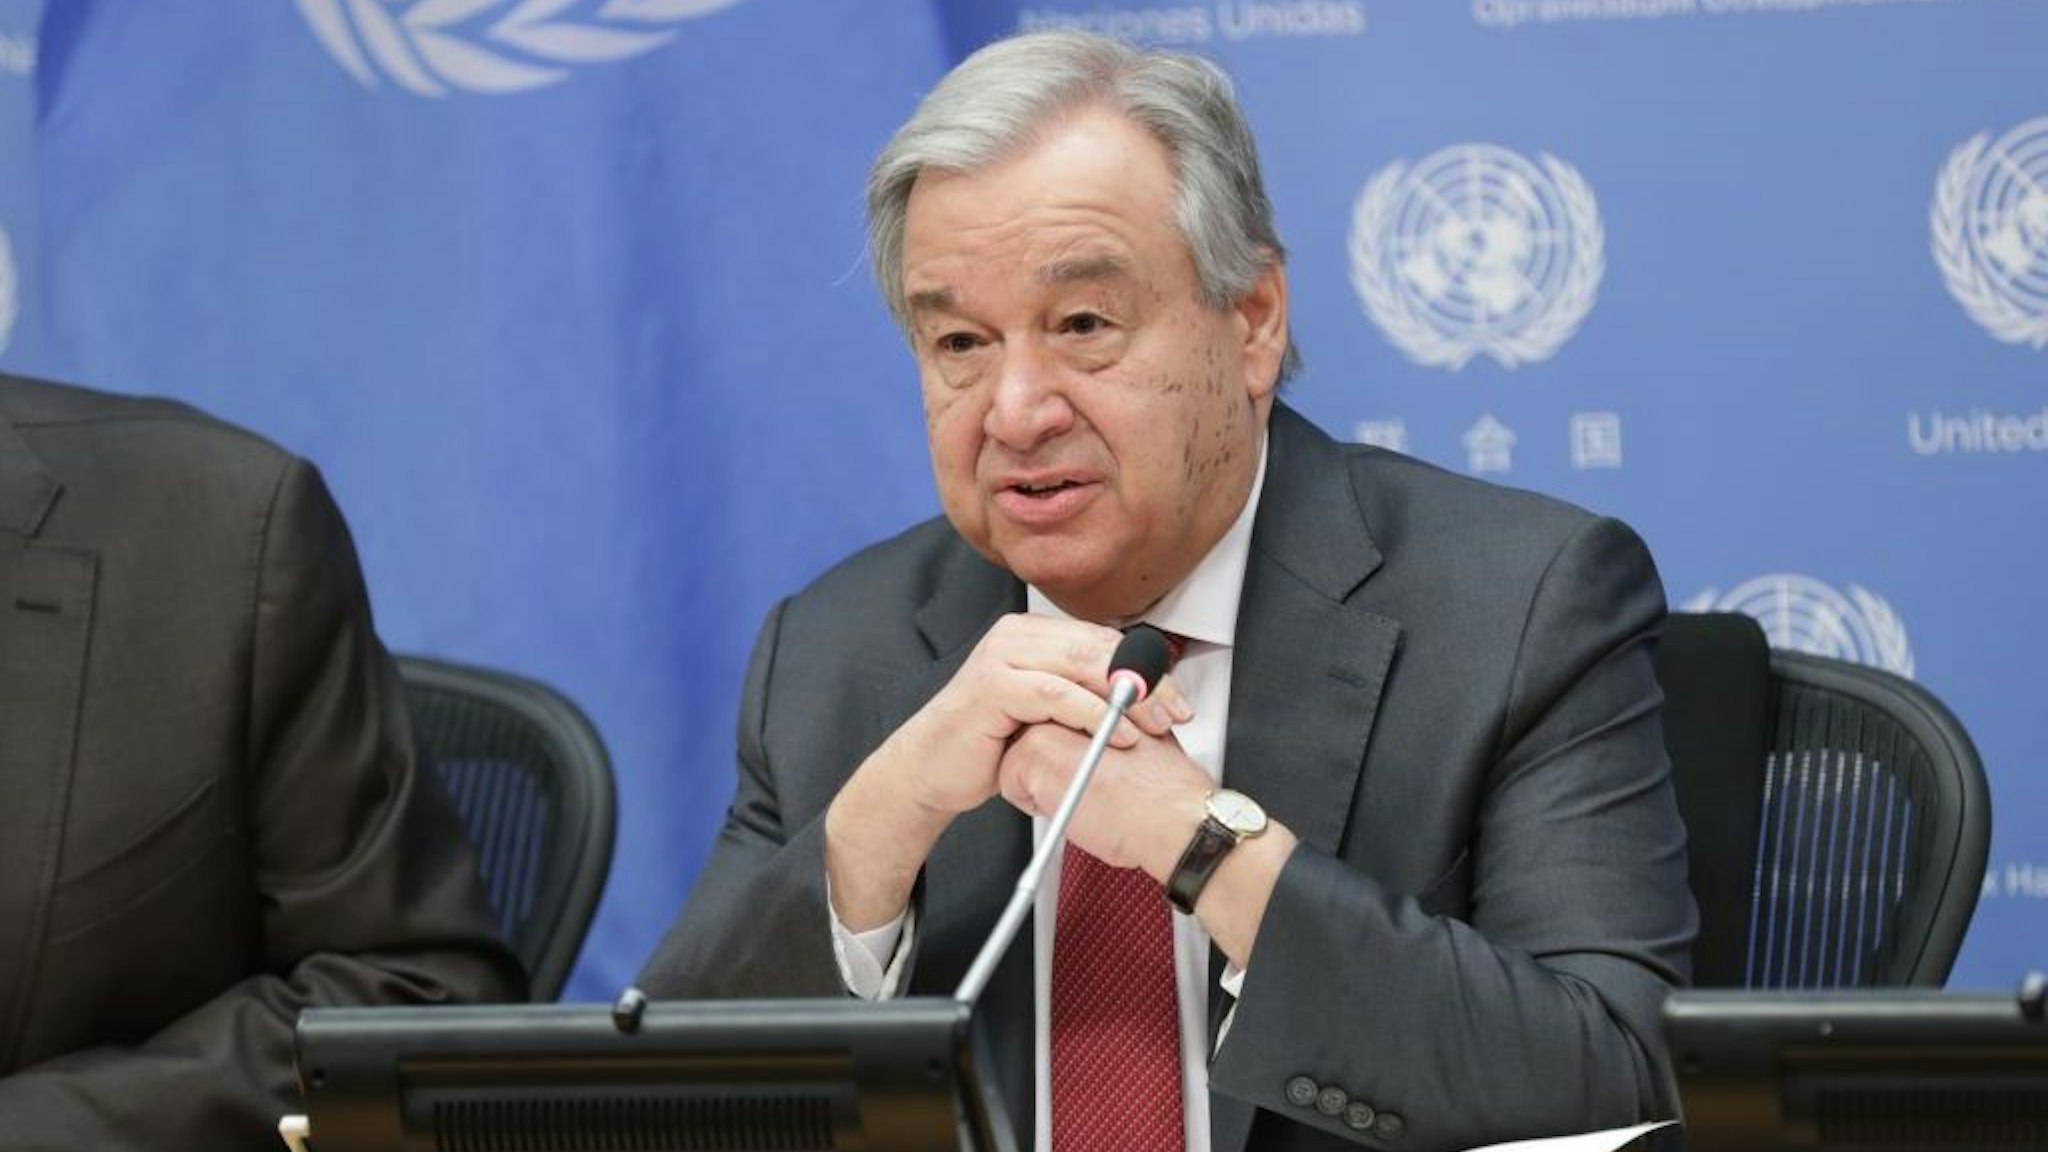 Portrait during Beginning of the Year Press conference of Secretary General Antonio Guterres at the UN Headquarters in New York City, New York, February 4, 2020. (Photo by EuropaNewswire/Gado/Getty Images)